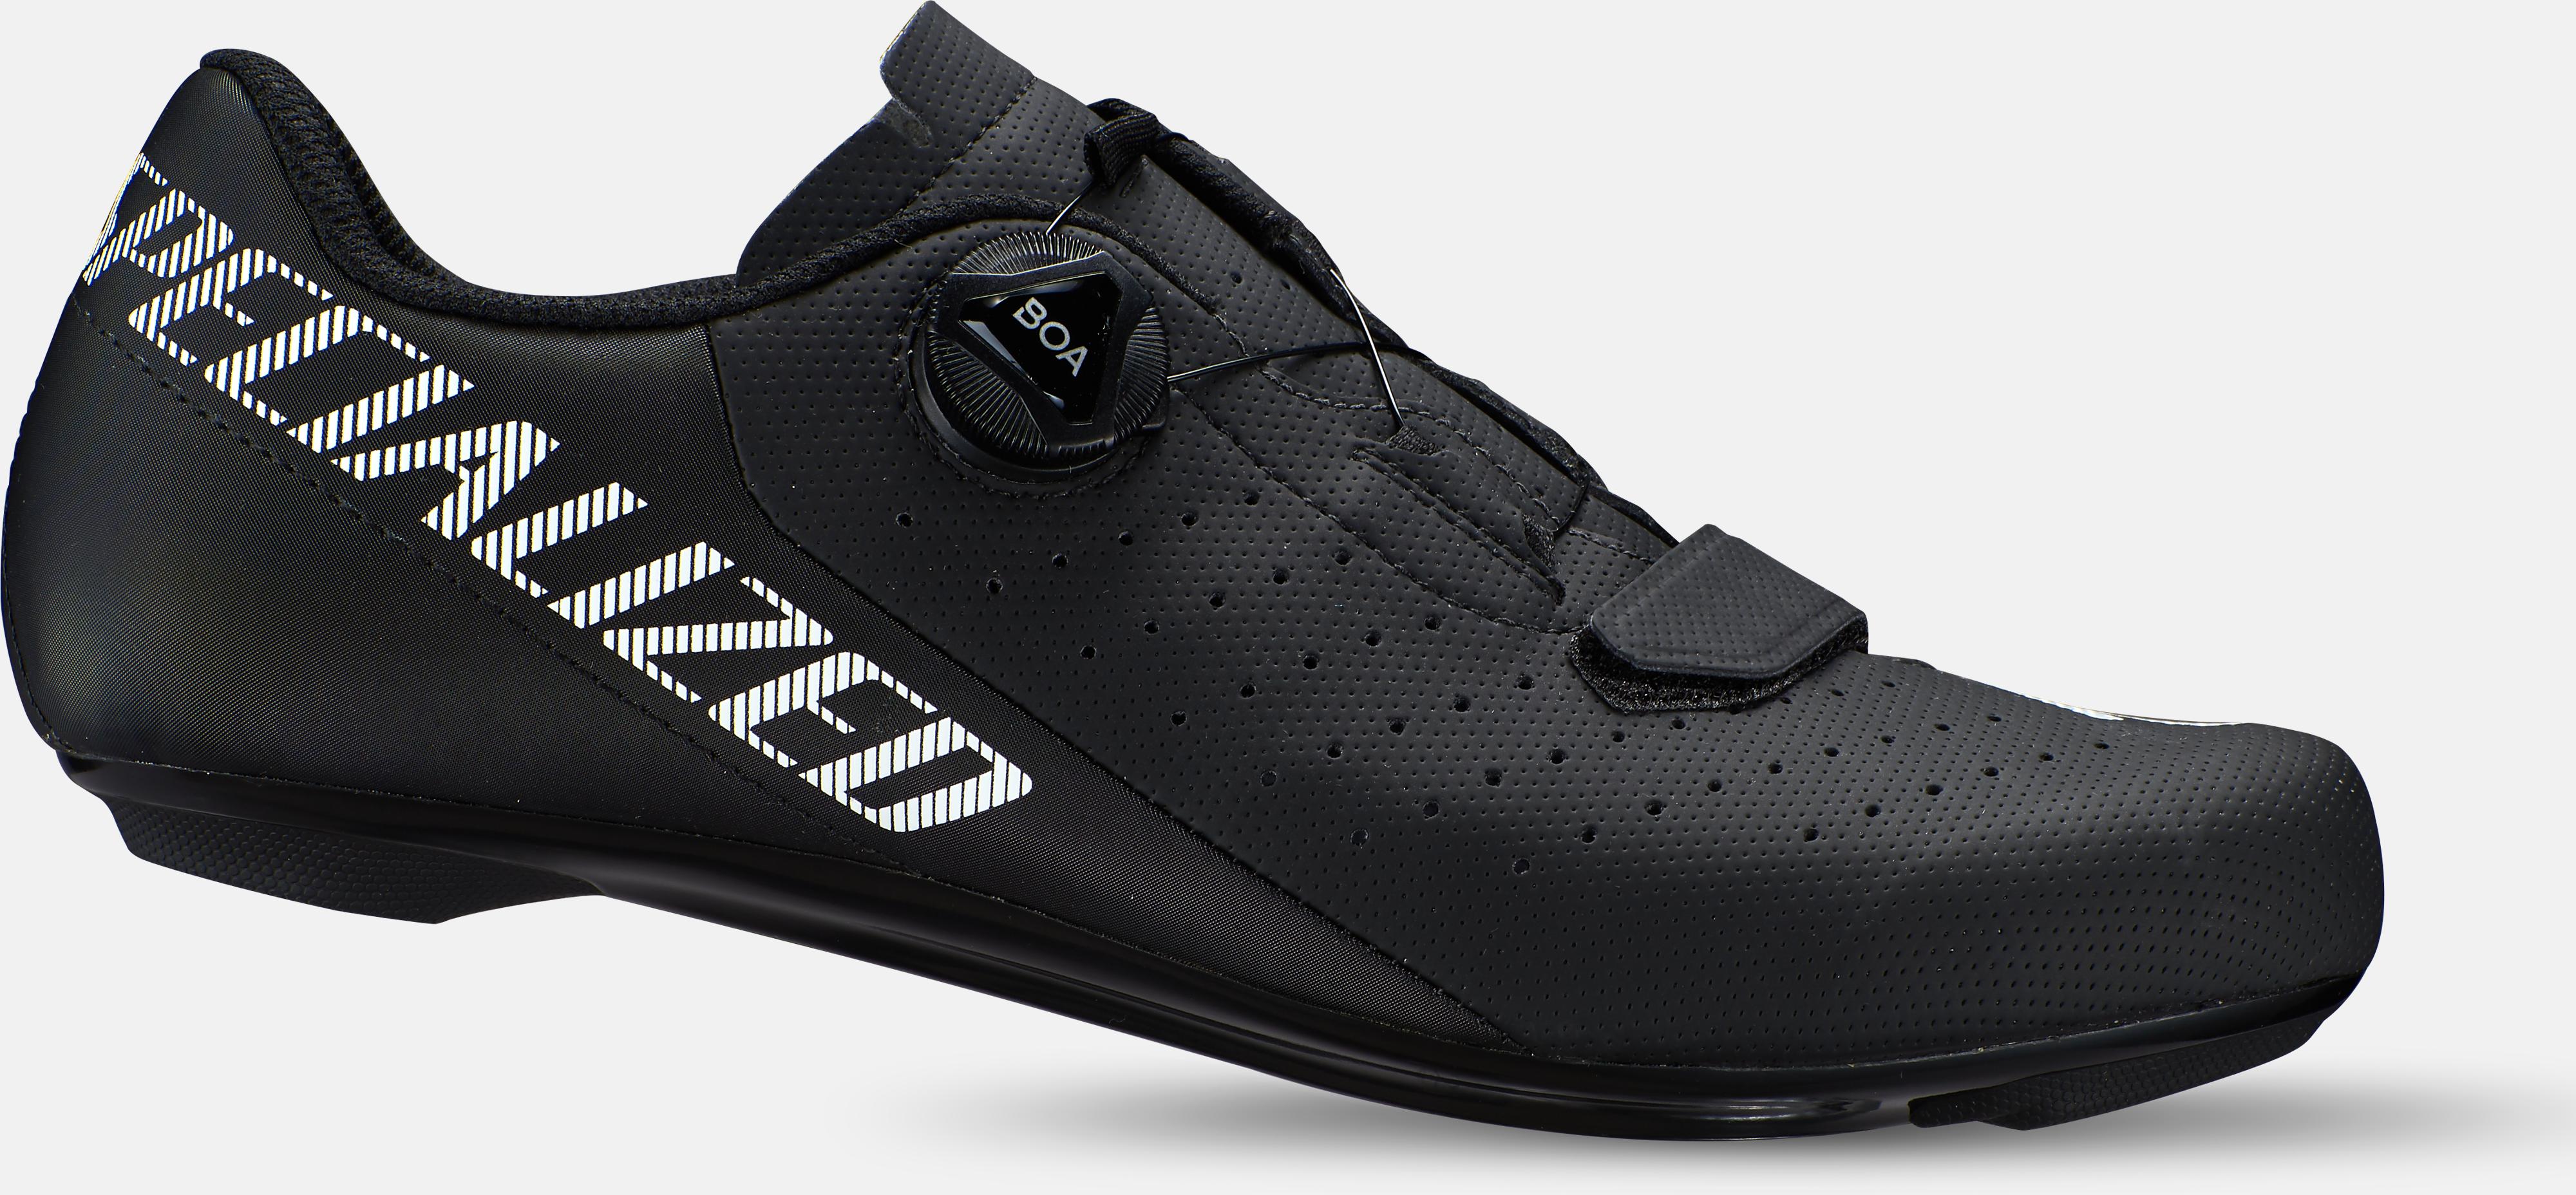 Torch 1.0 Road Shoes | Specialized.com